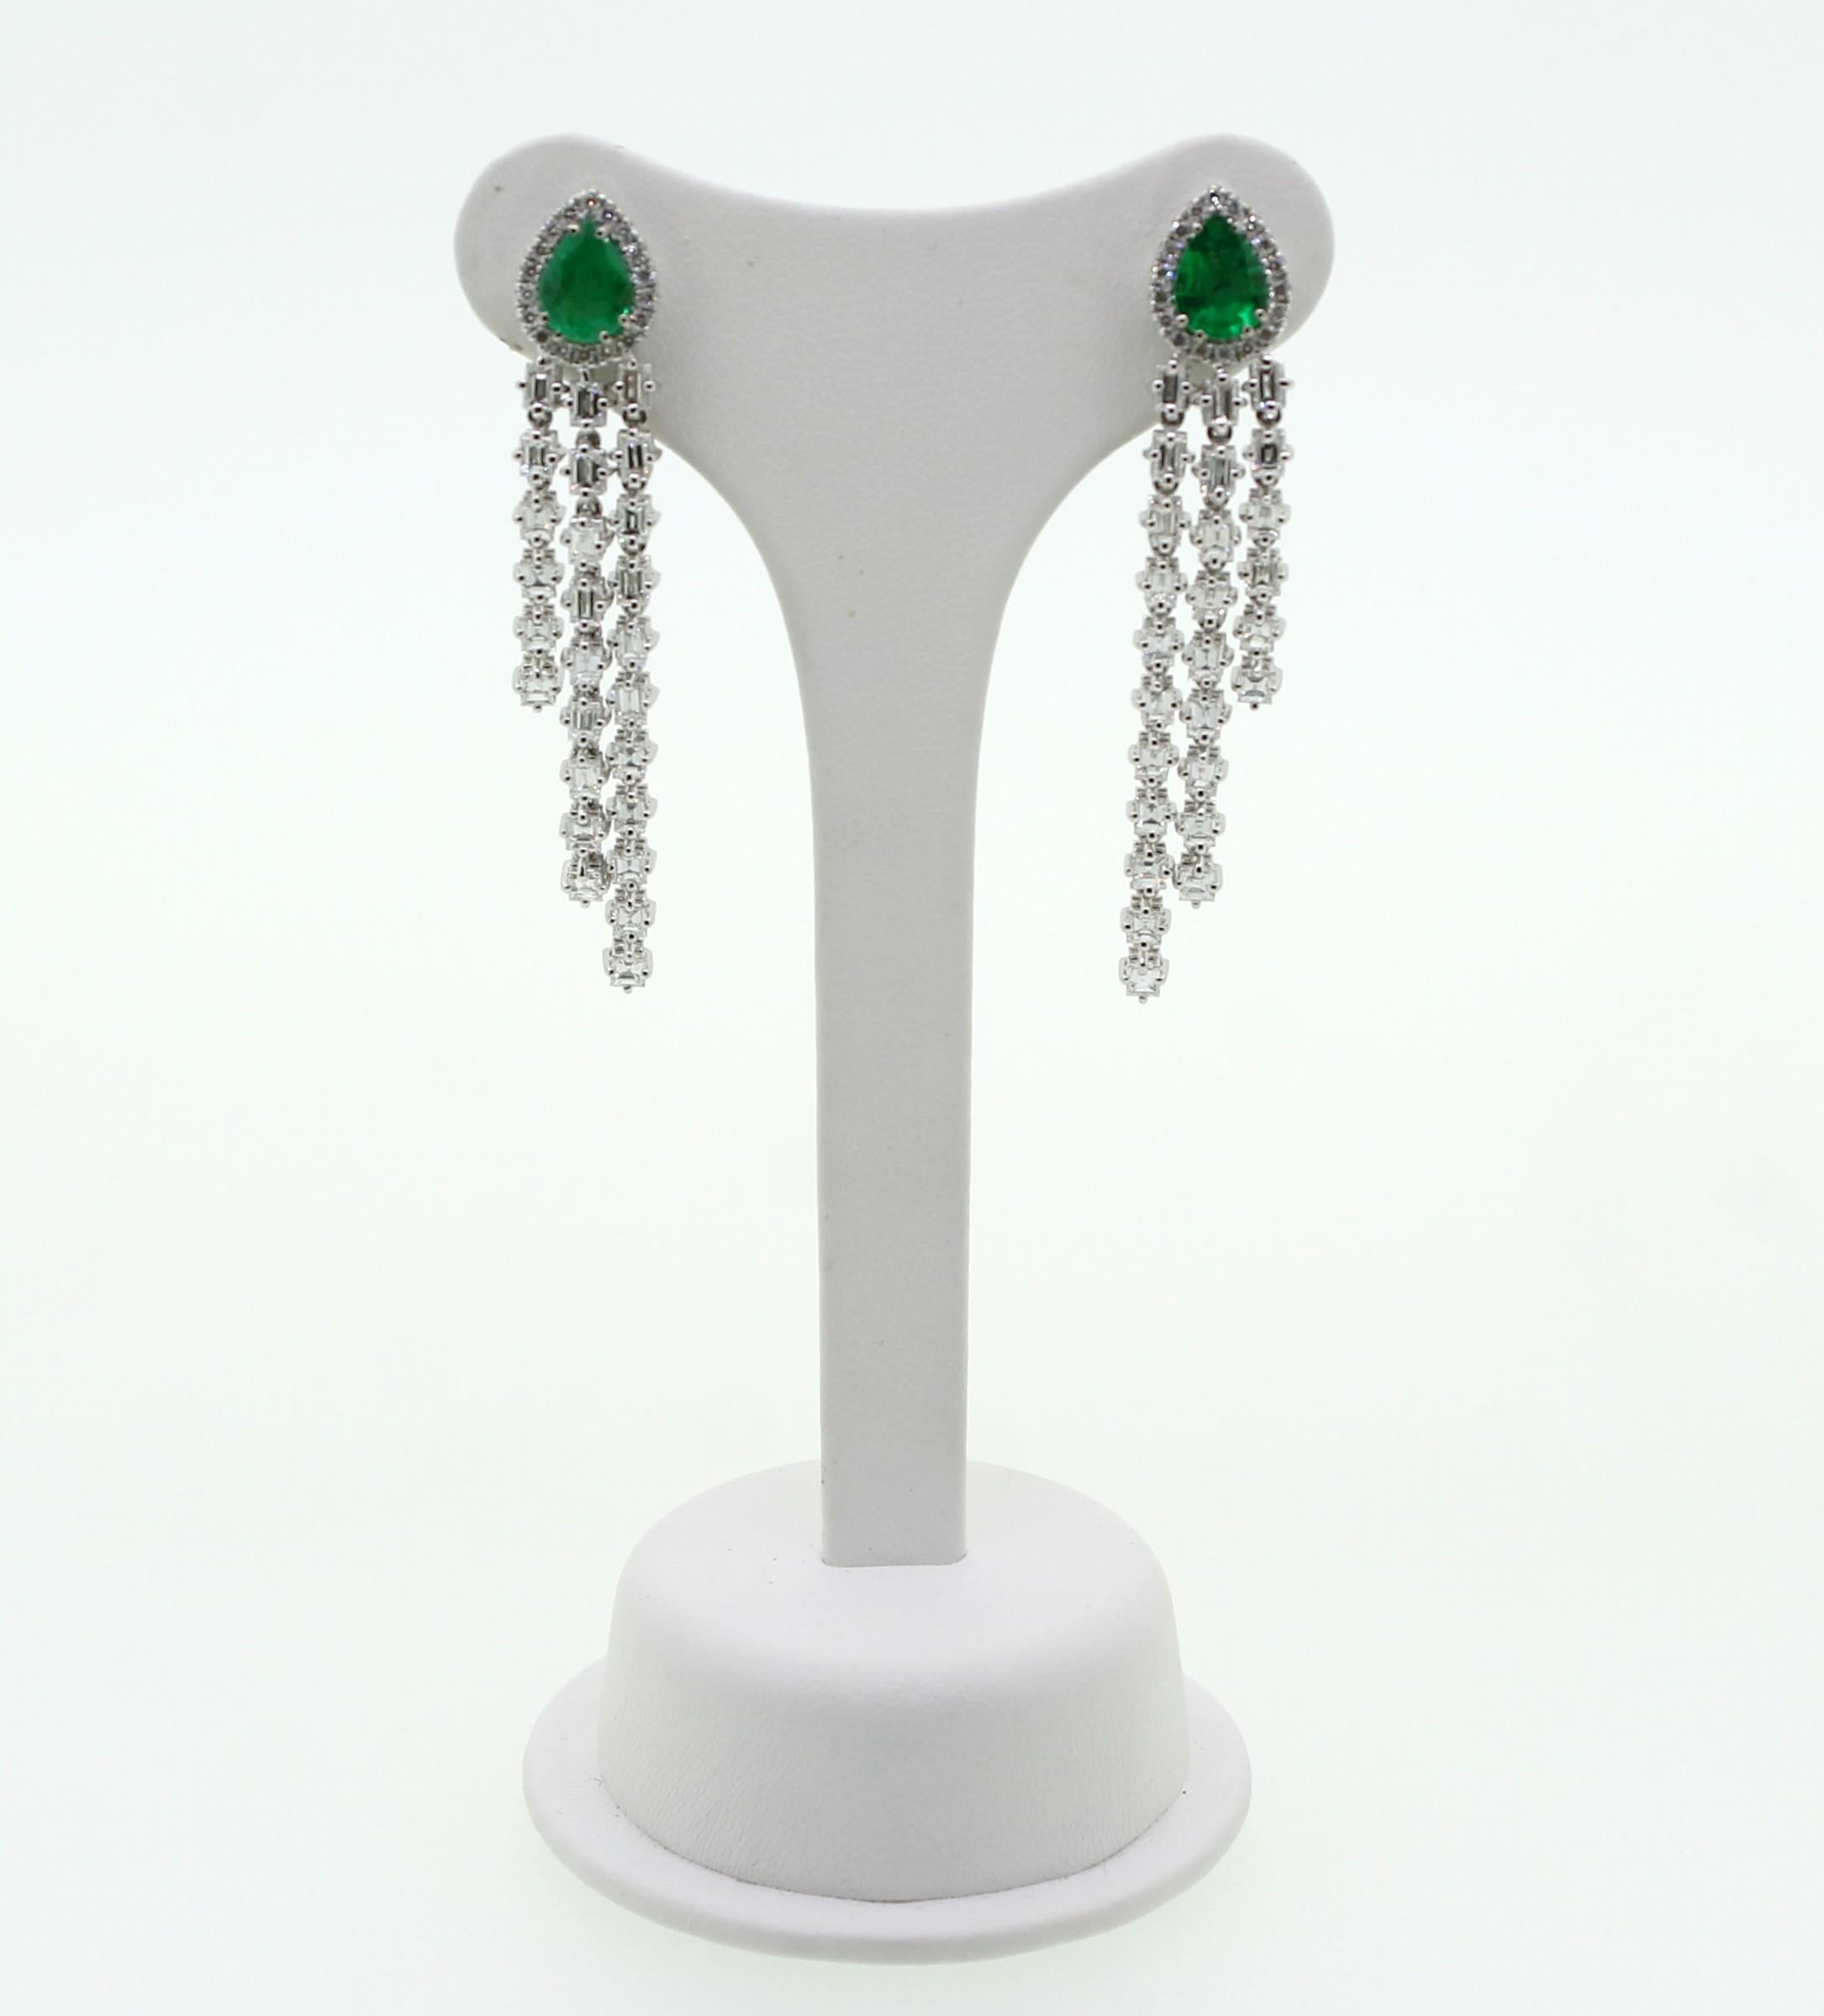 Contemporary 1.73 Carat Pear Shape Emerald and White Diamonds Dangle Earrings For Sale